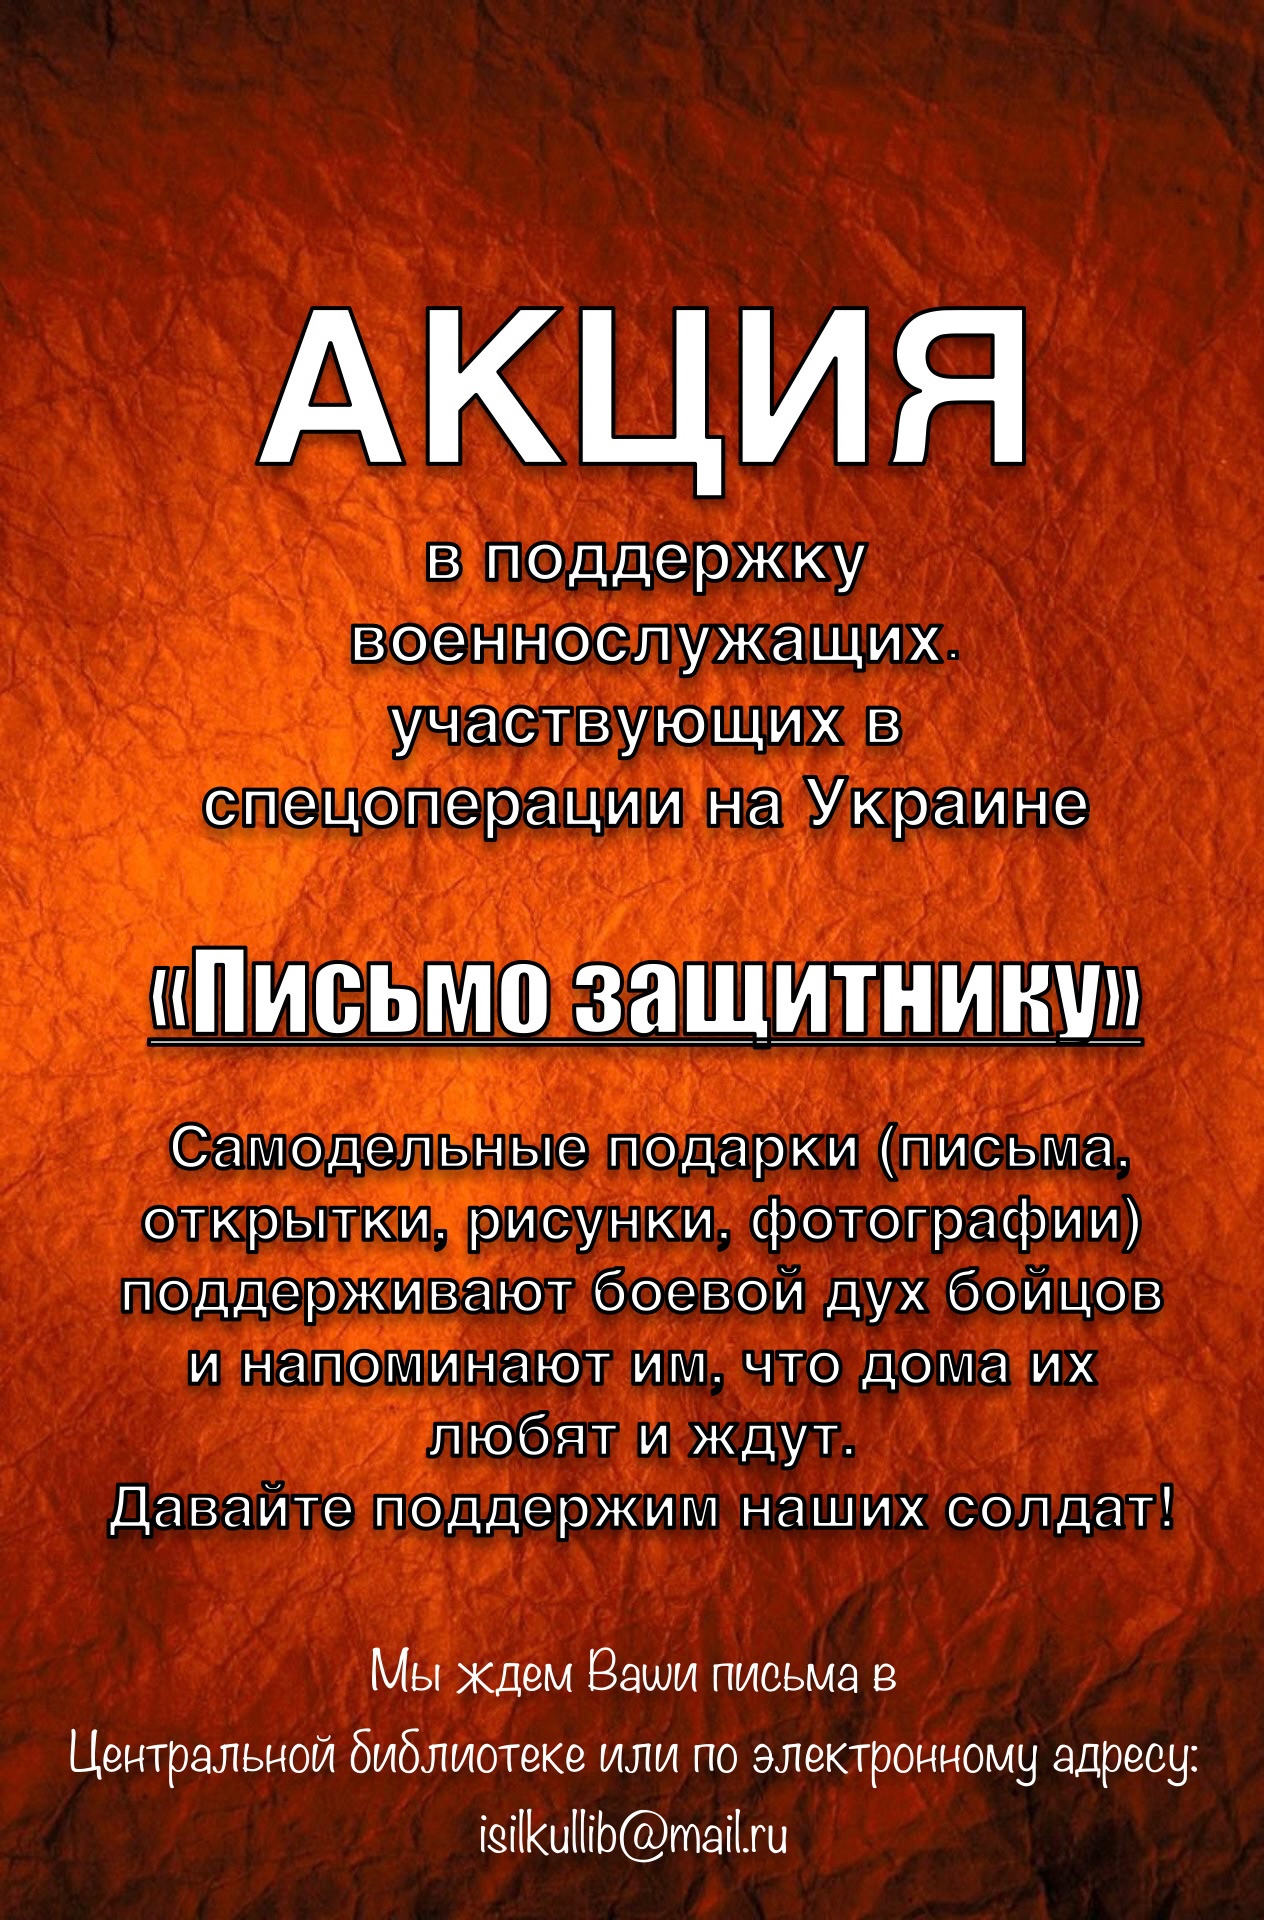 You are currently viewing Акция “Письмо защитнику”